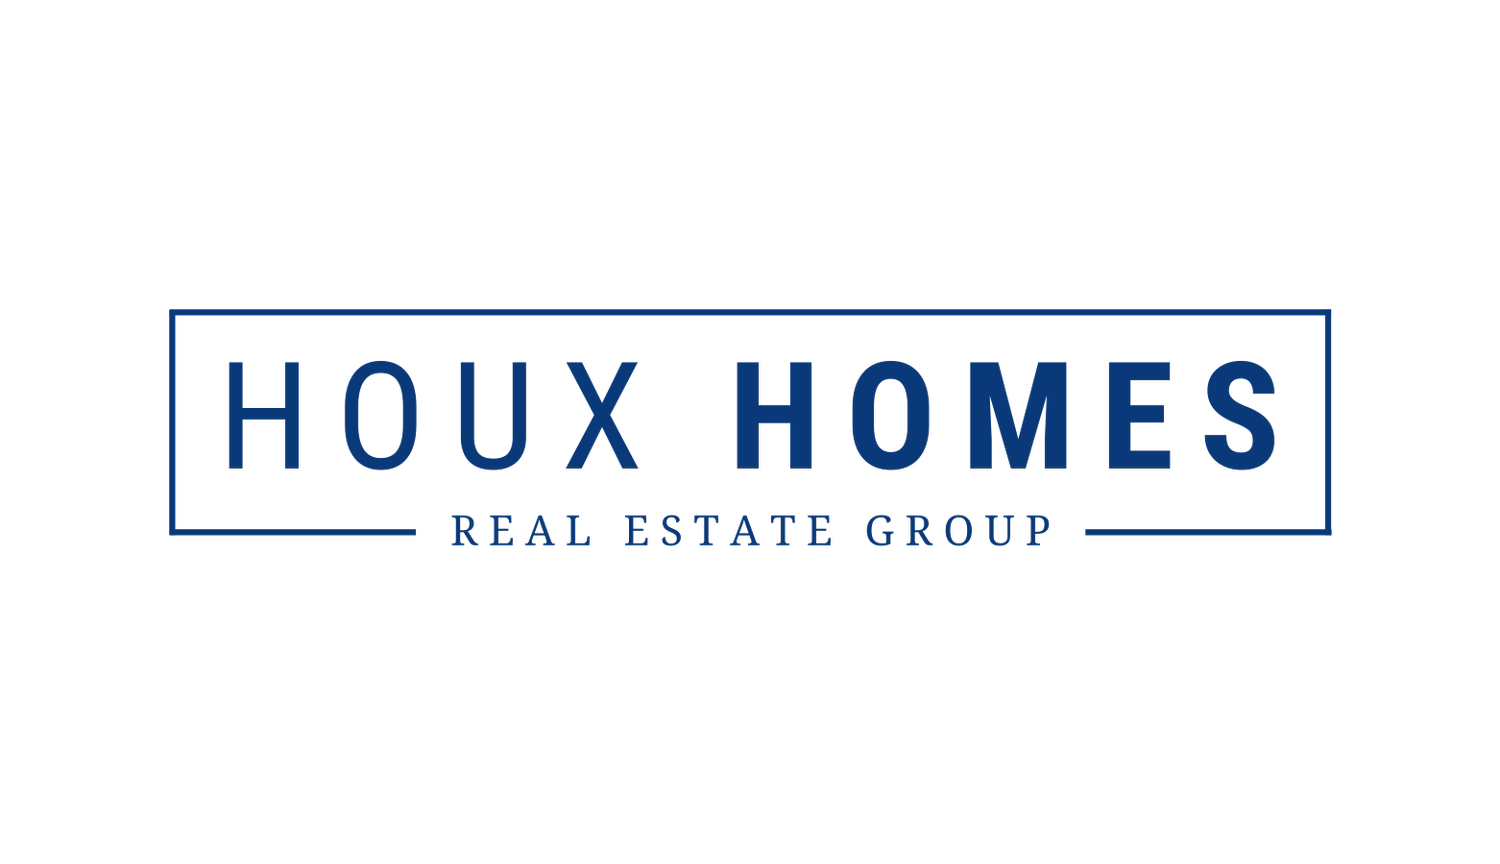 Houx Homes Real Estate Group